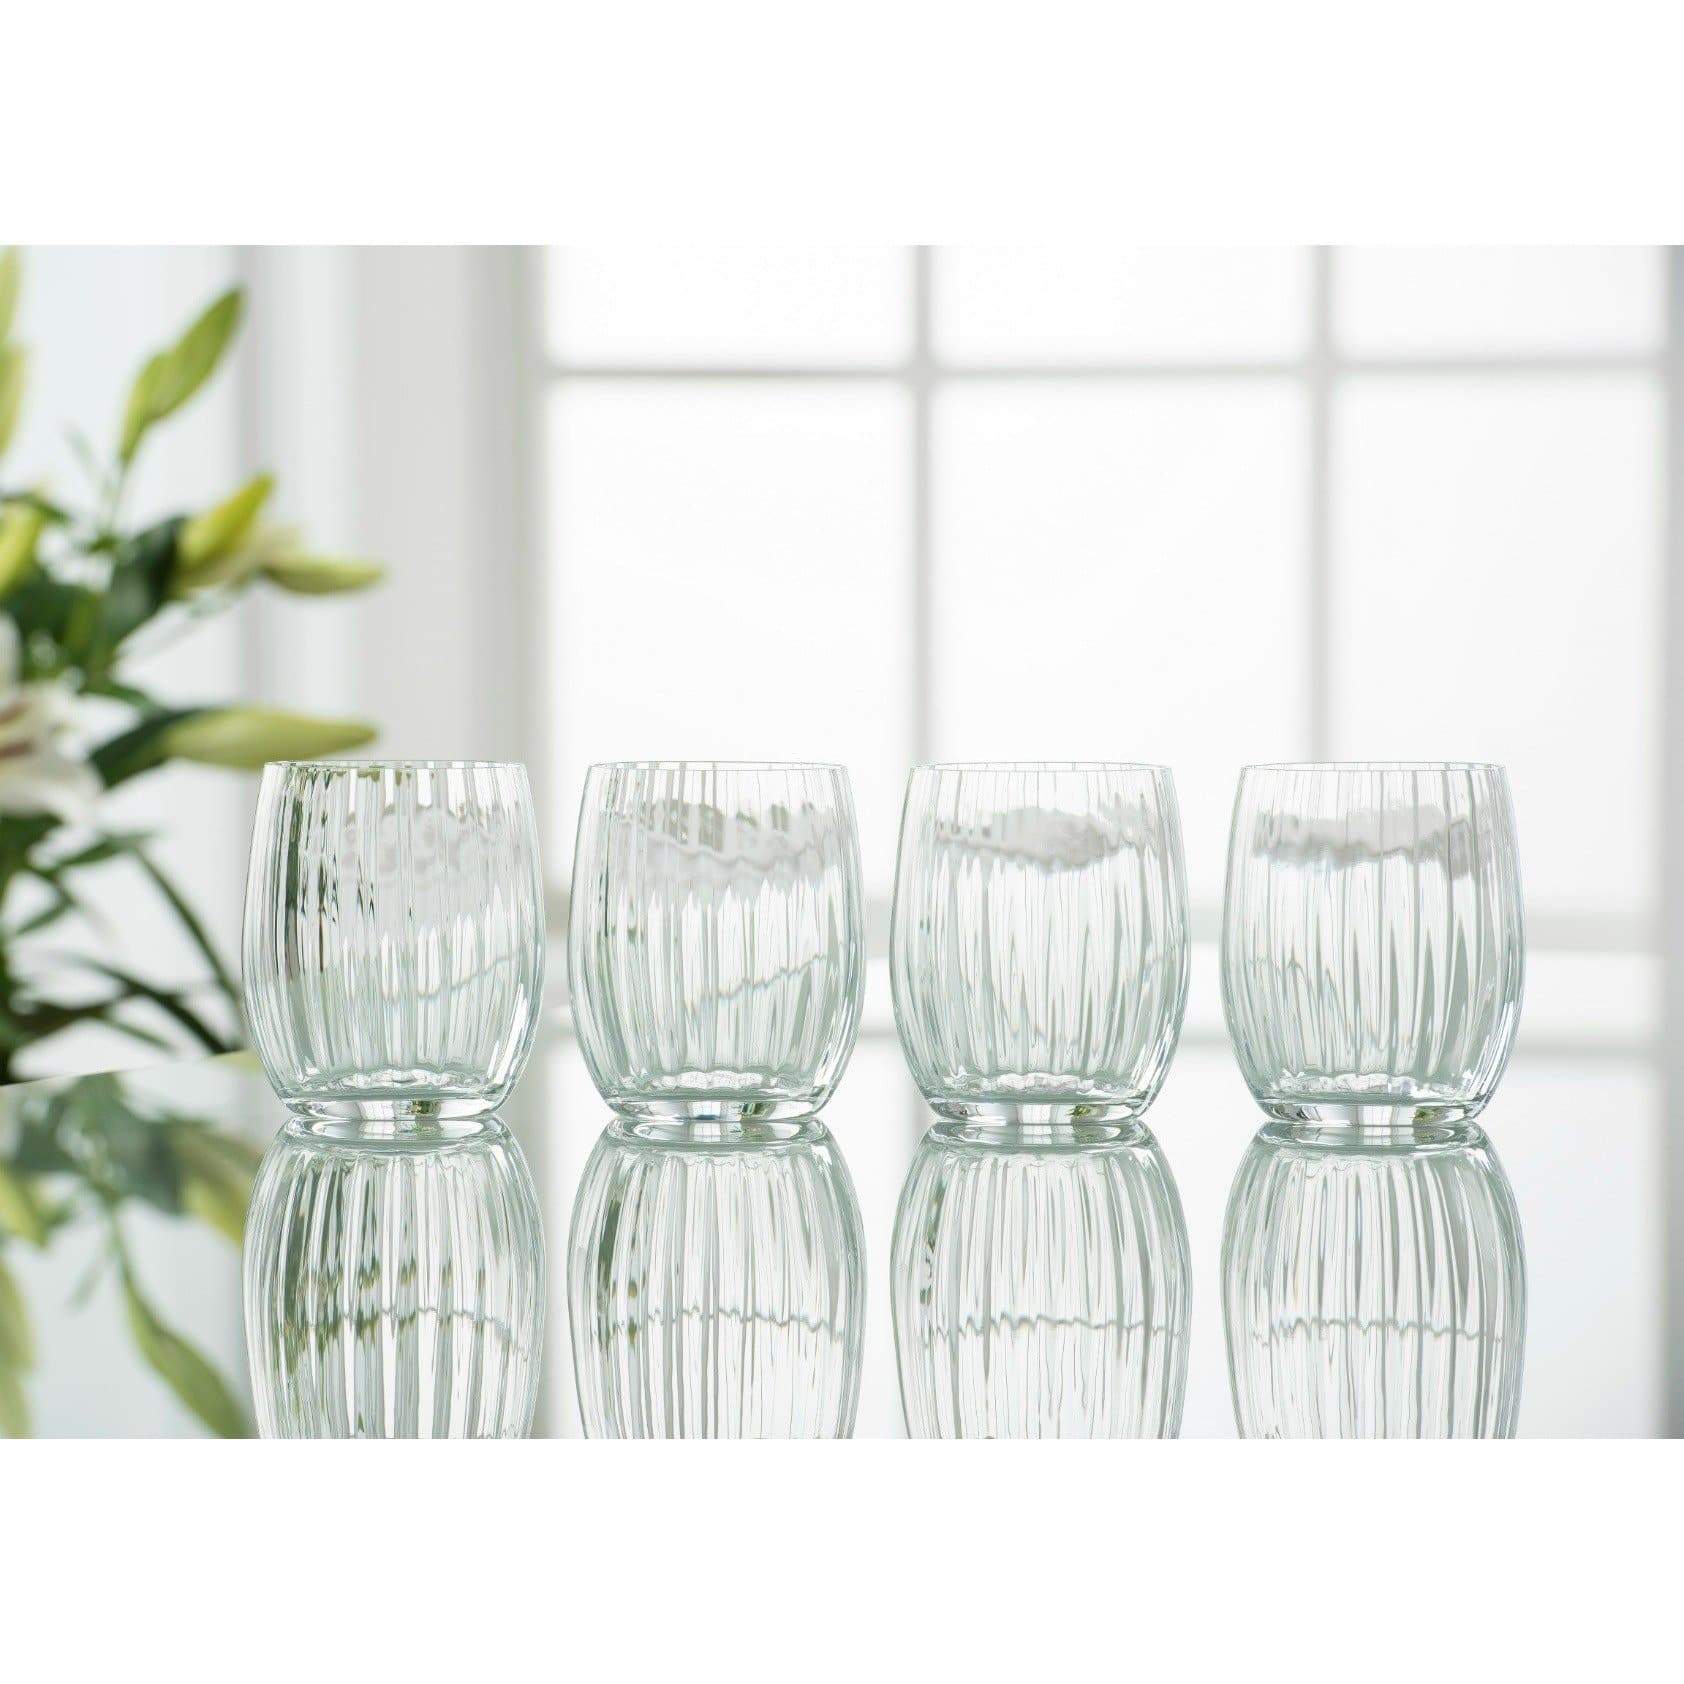 Galway Crystal ERNE TUMBLER SET OF 4 - A & M News and Gifts